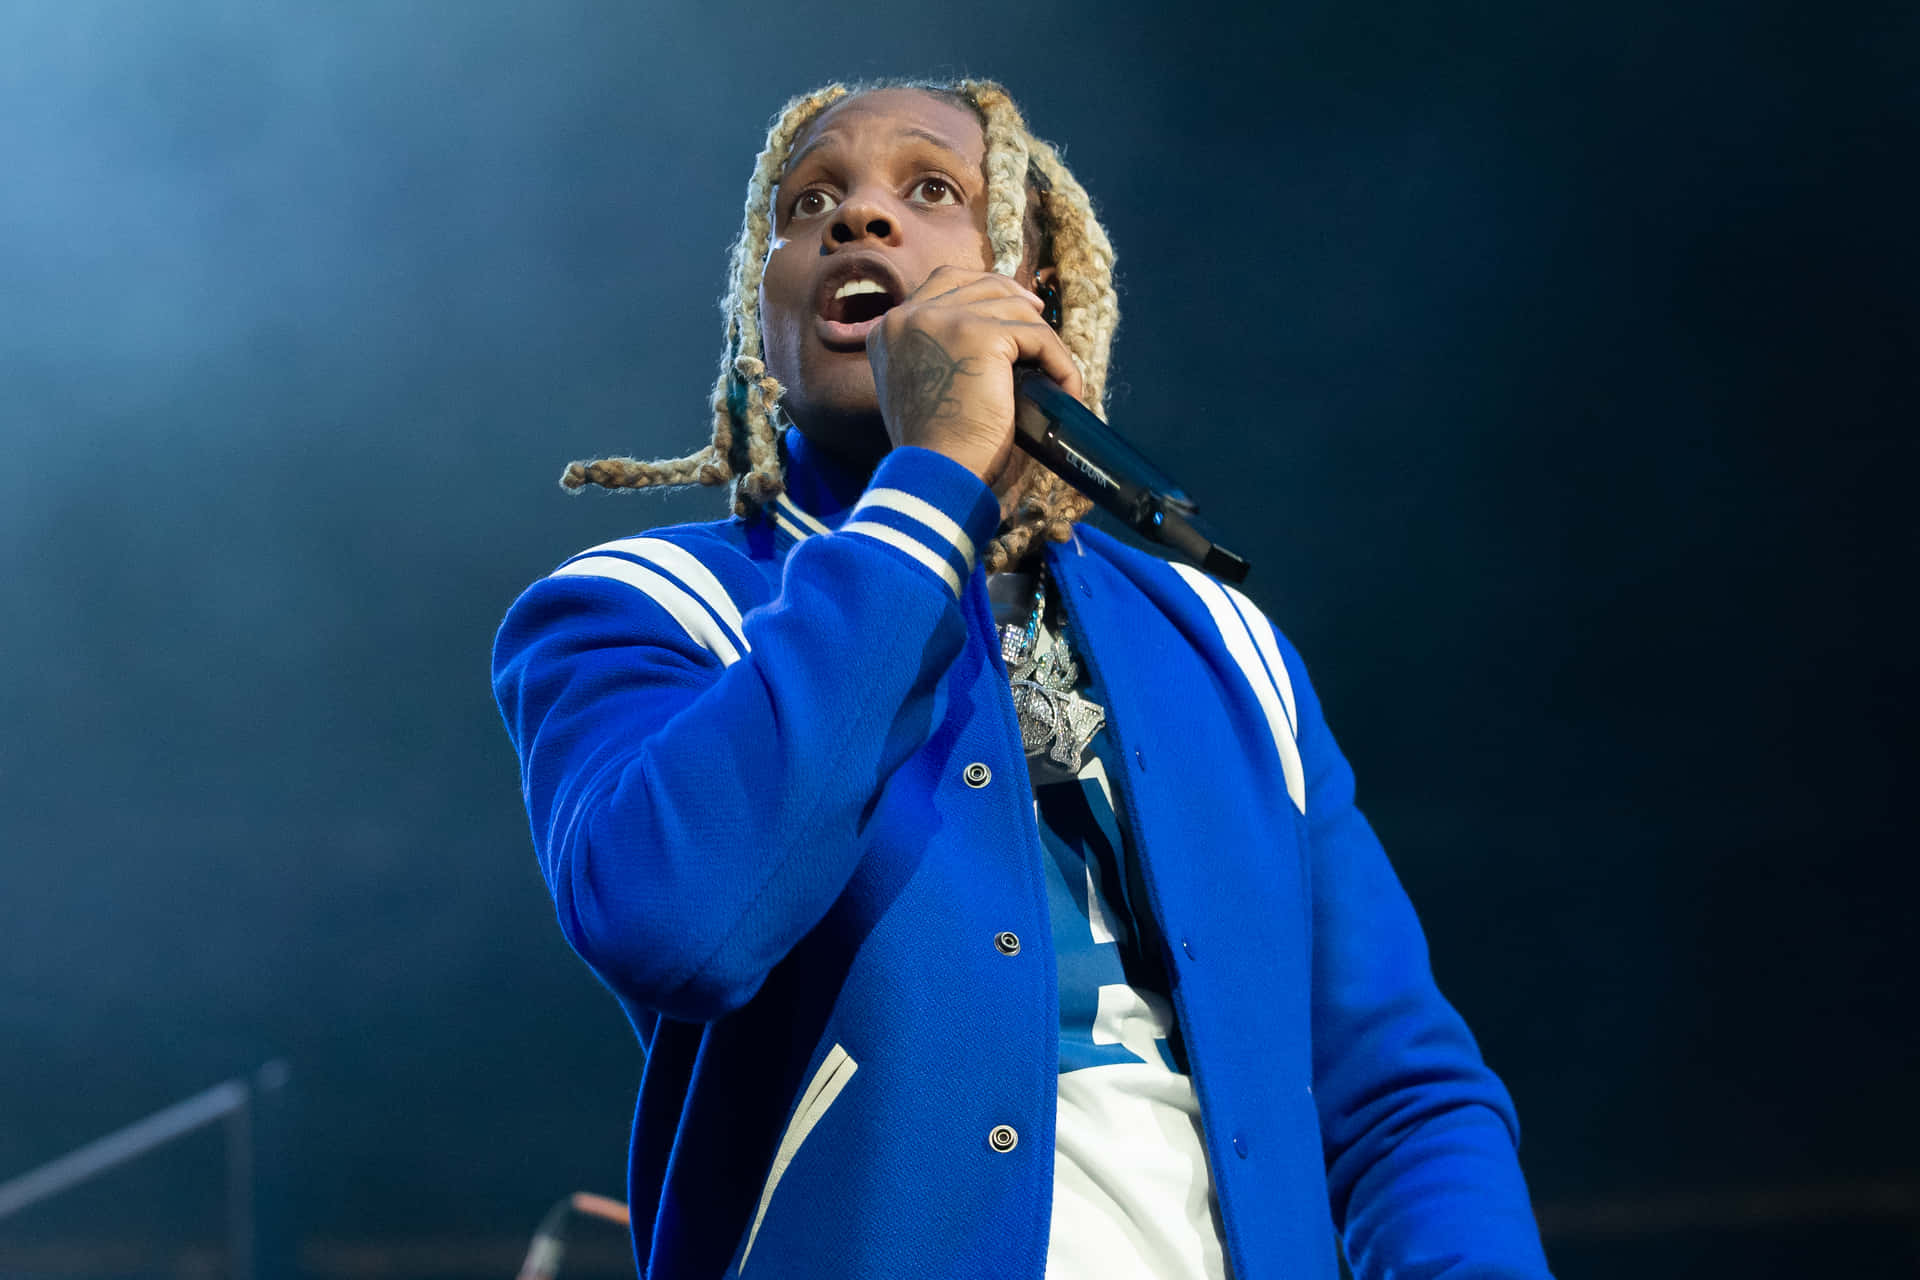 Download Lil Durk striking a pose in a stylish outfit